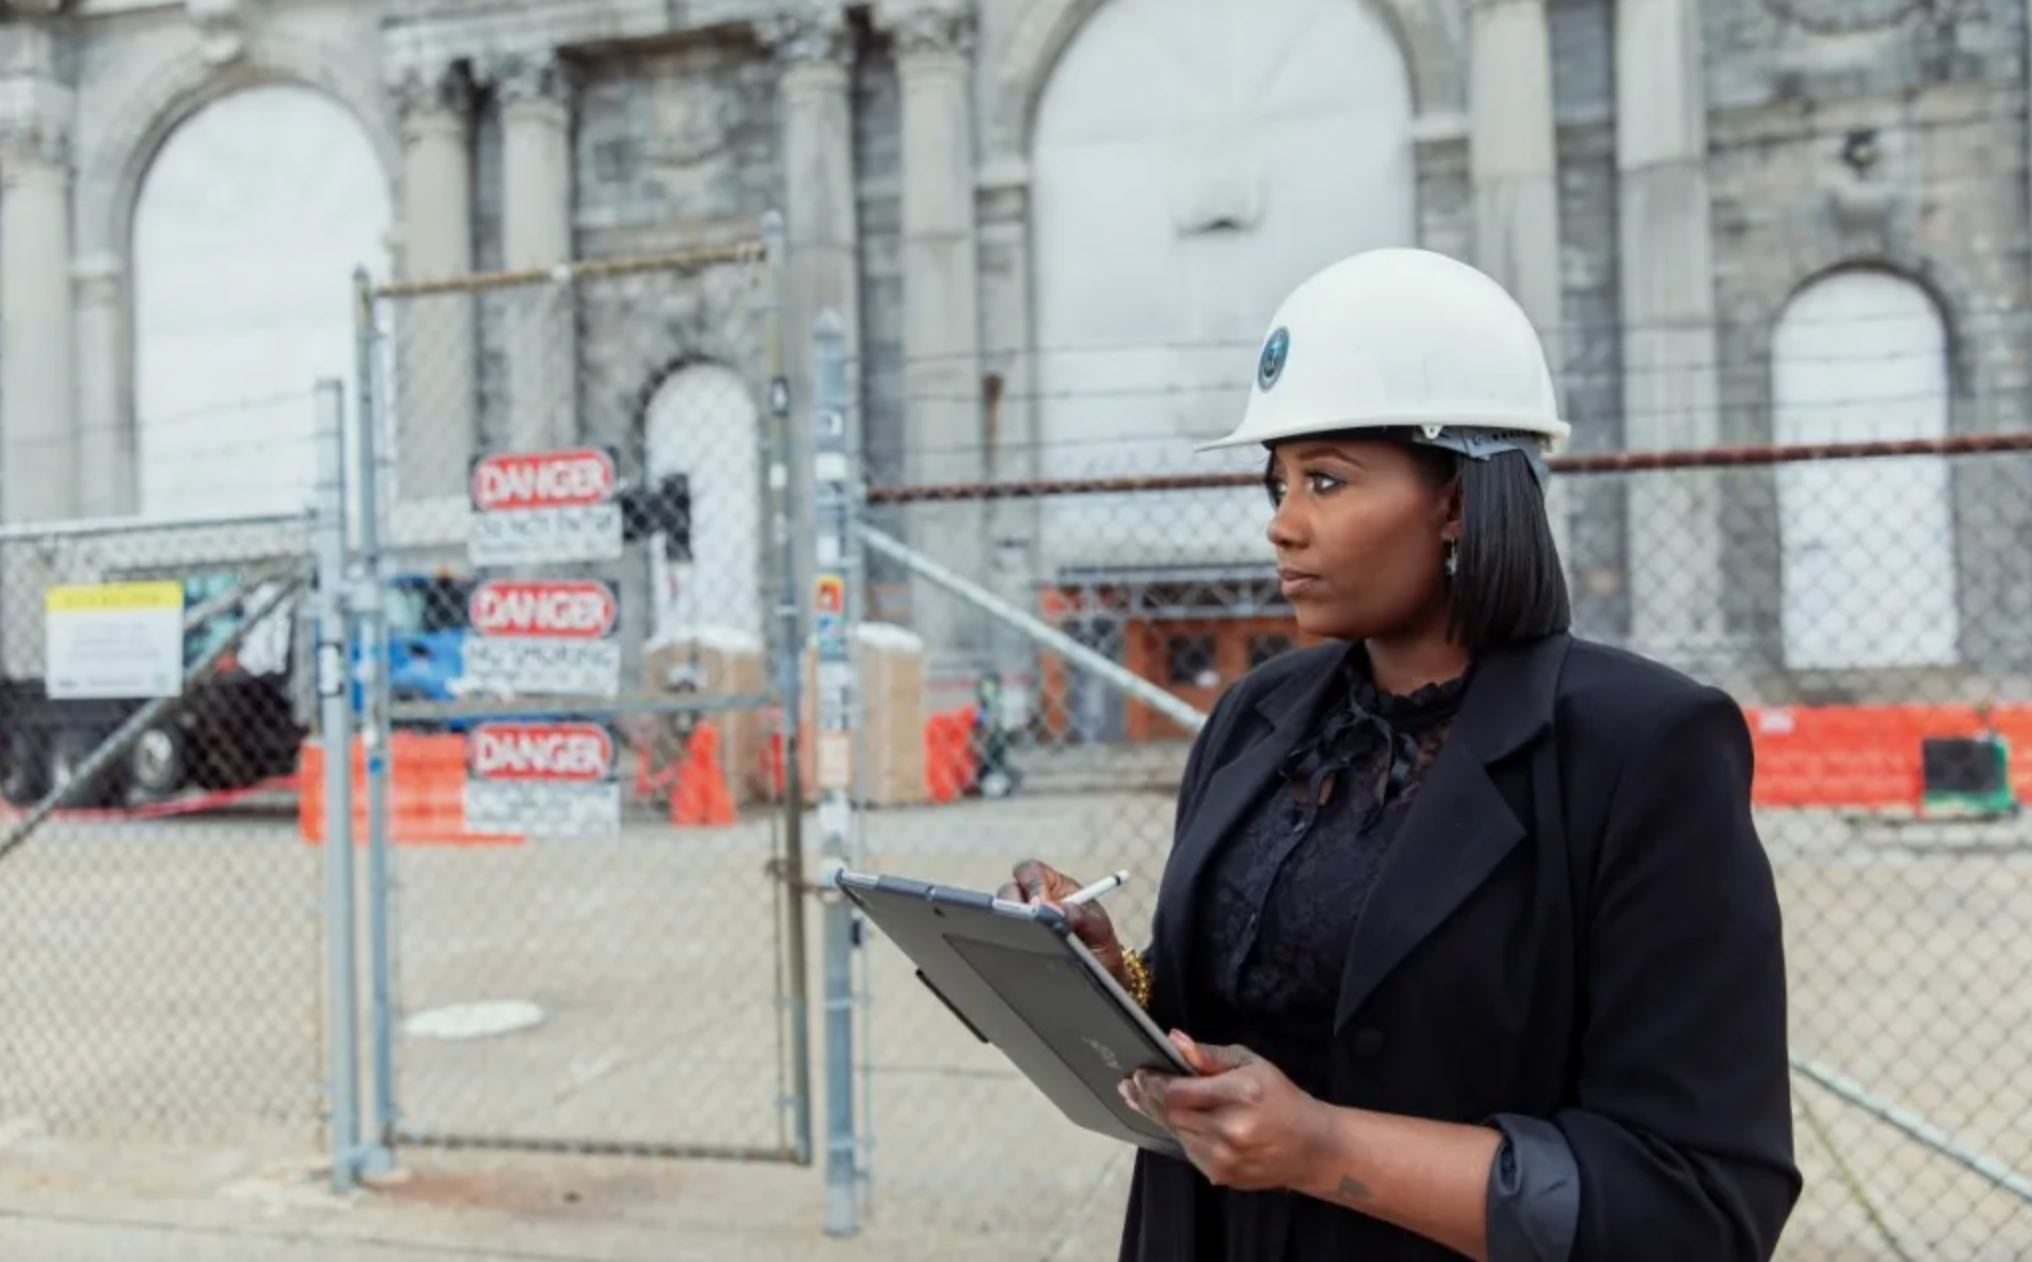 This Black Woman-Owned Electric Company Secured Six-Figure Deal with Utility Giant